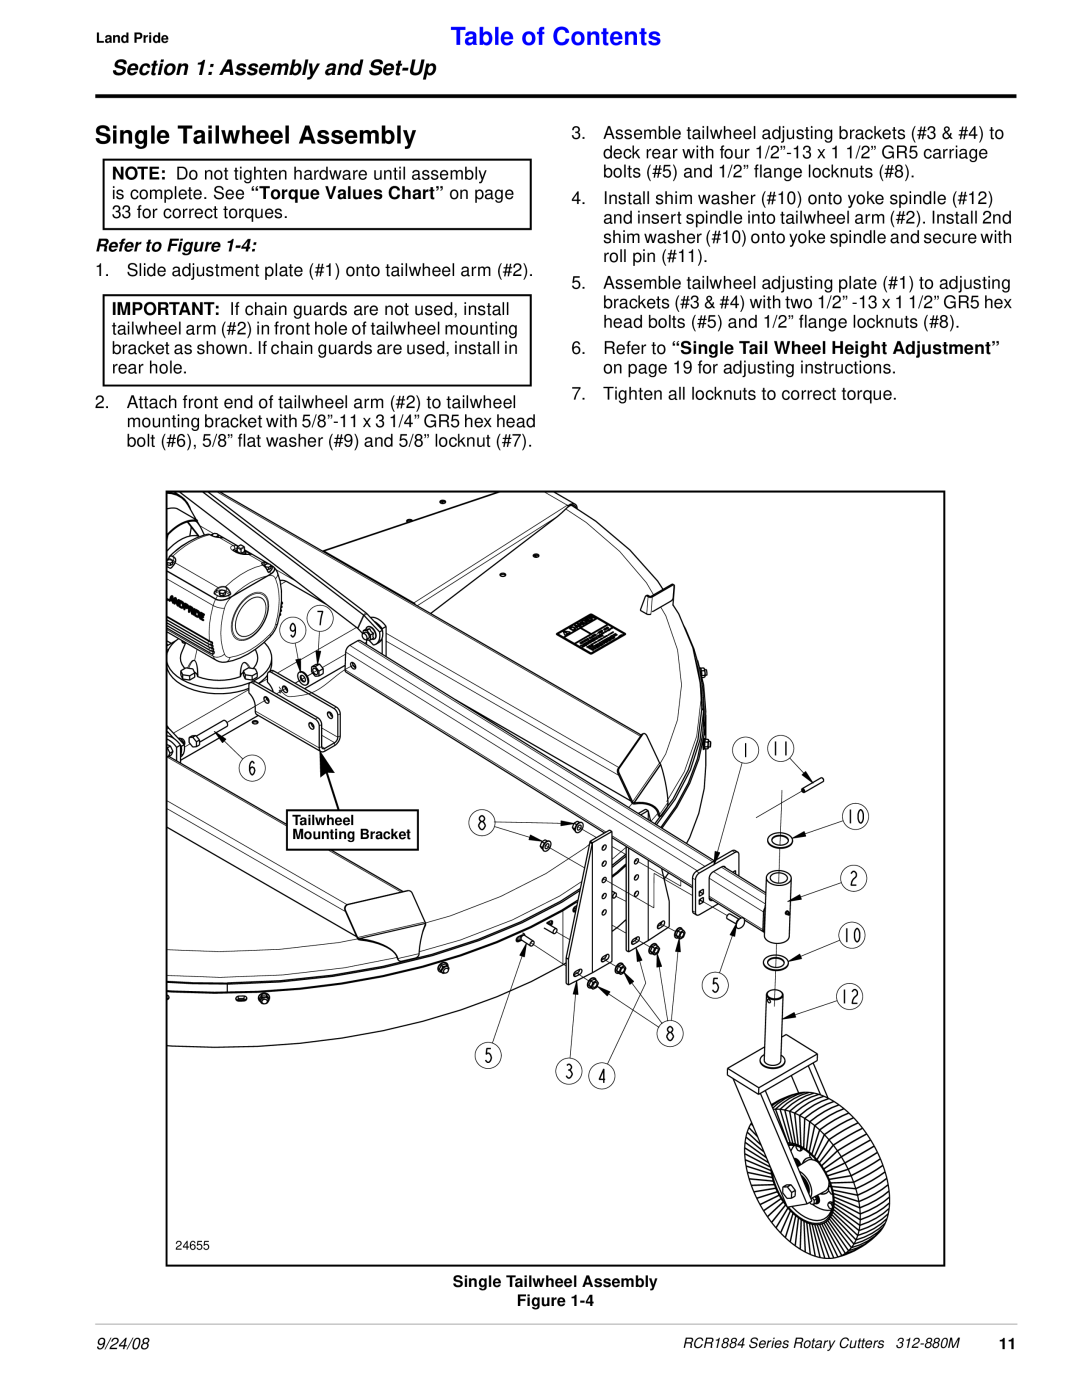 Land Pride RCR1884 manual Single Tailwheel Assembly, Table of Contents, Assembly and Set-Up, Refer to Figure 